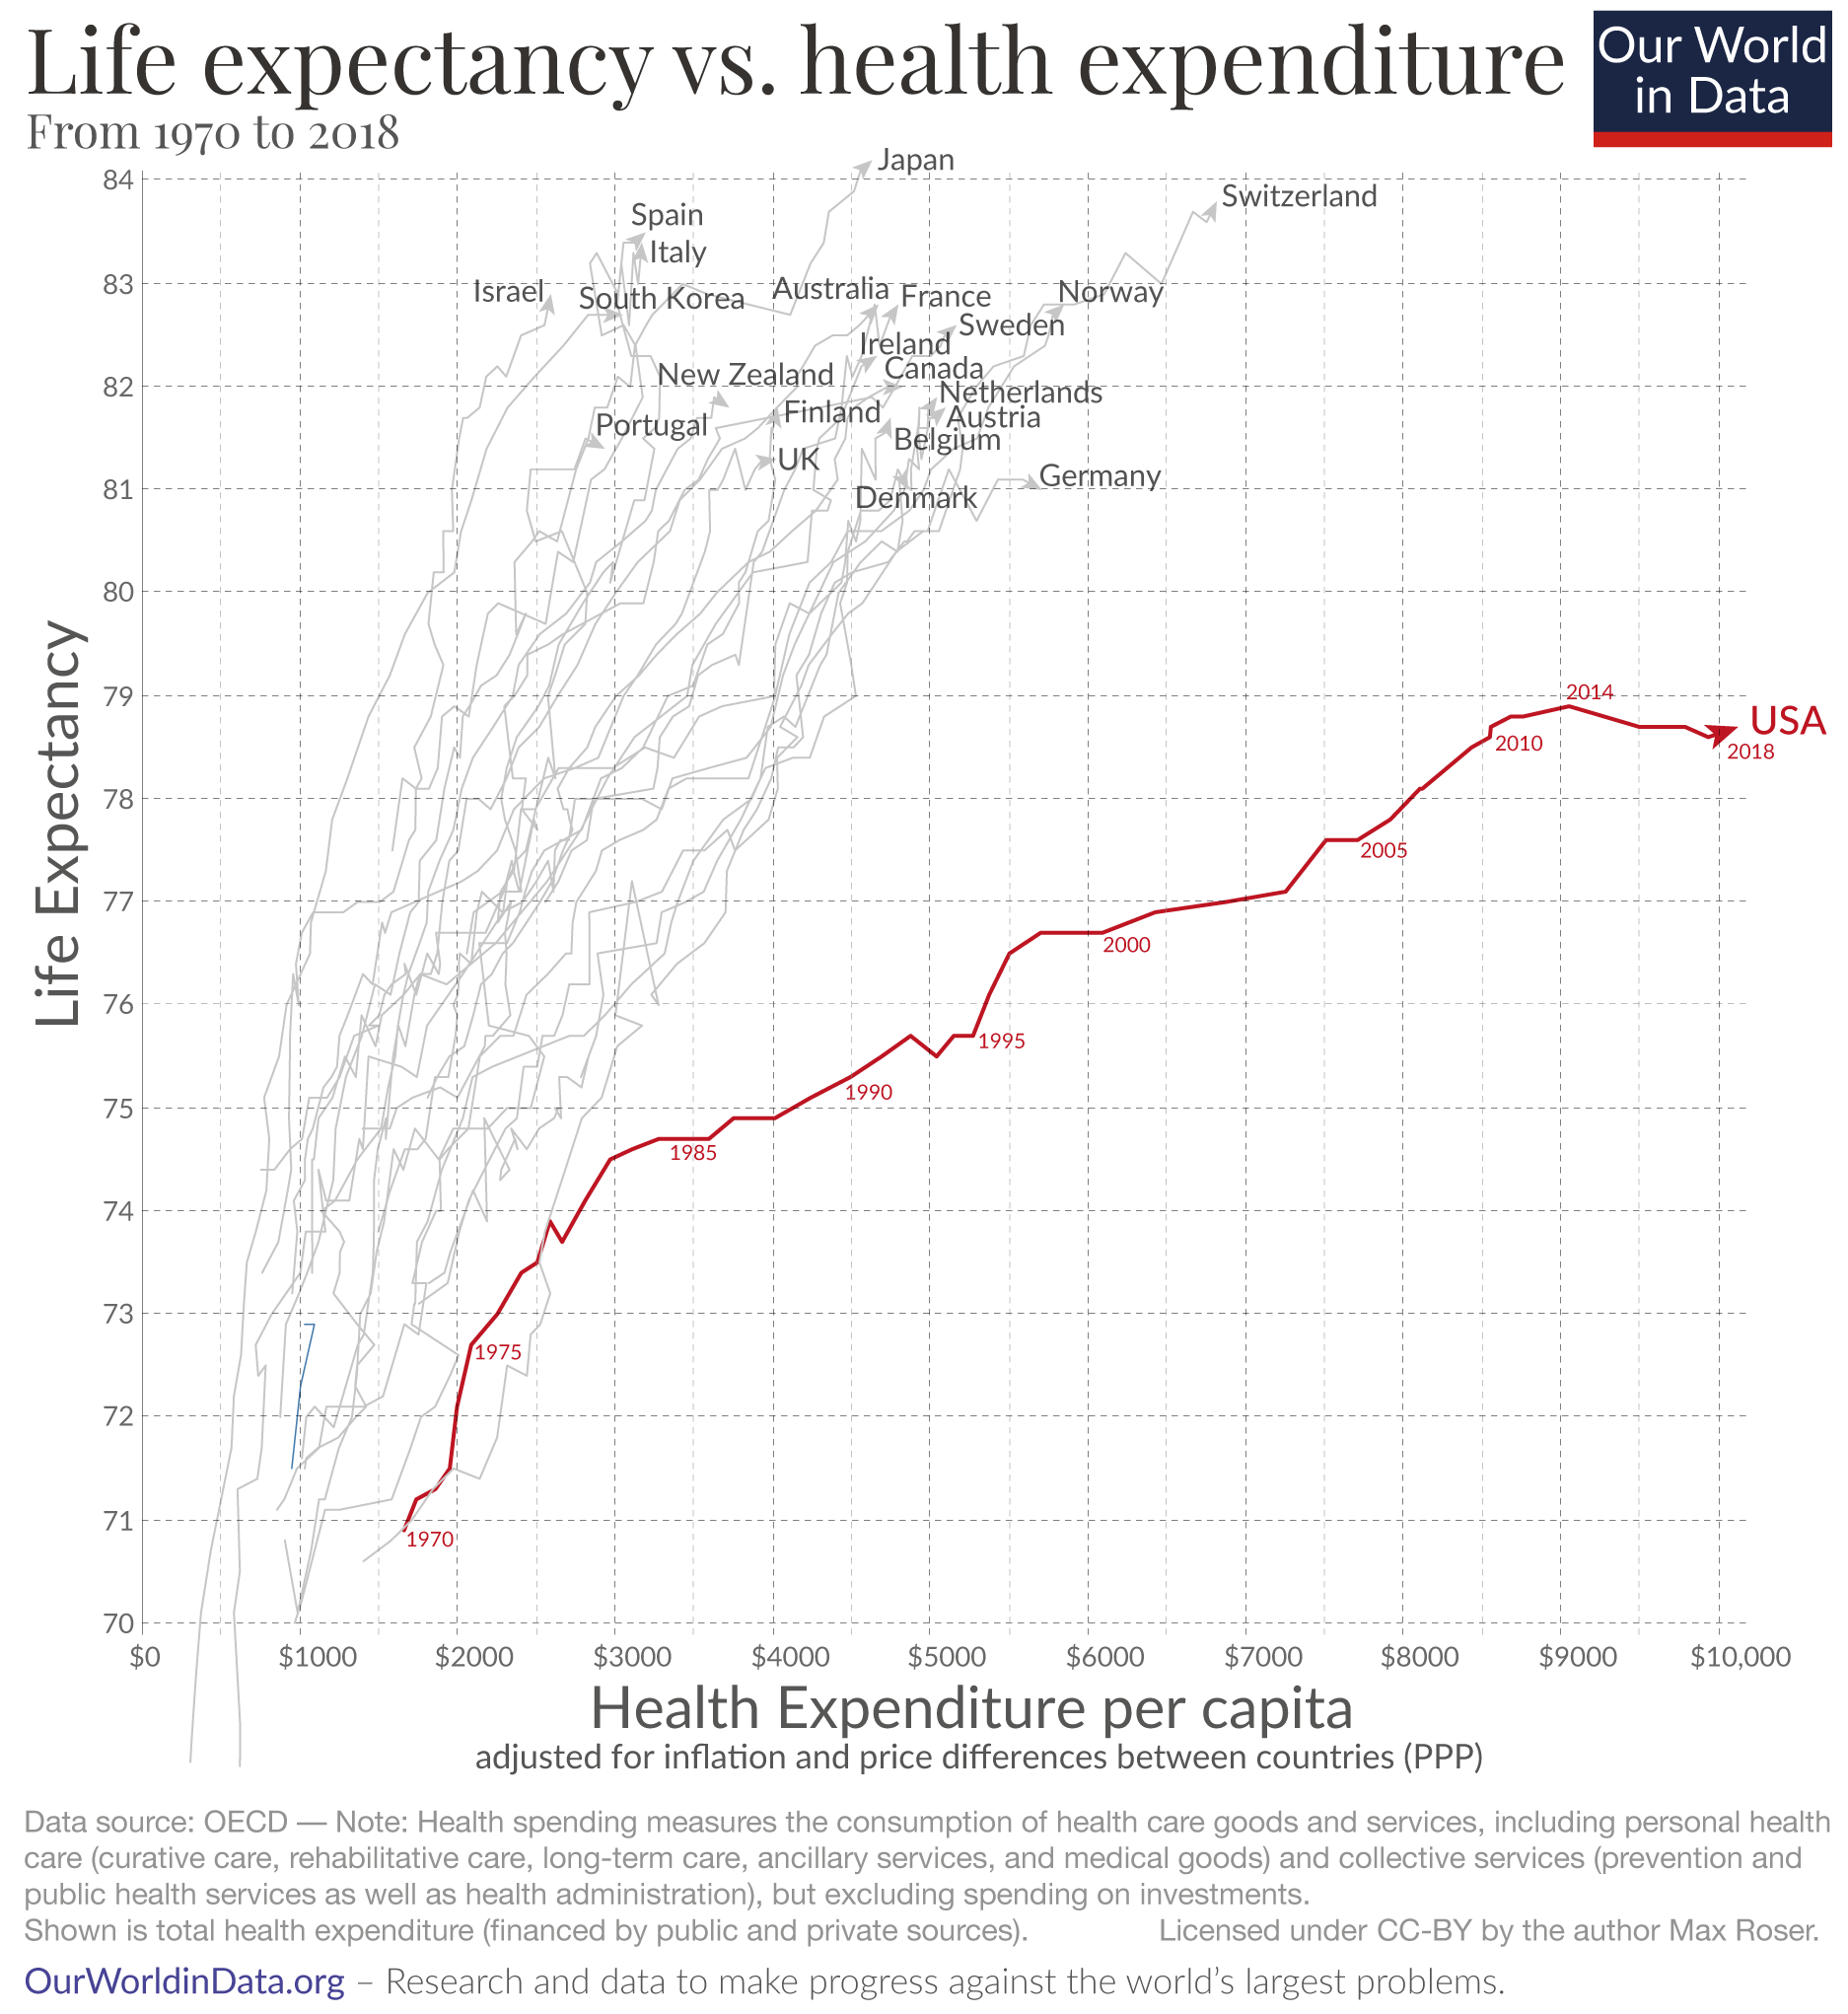 Life expectancy vs. health expenditure (1970-2018)